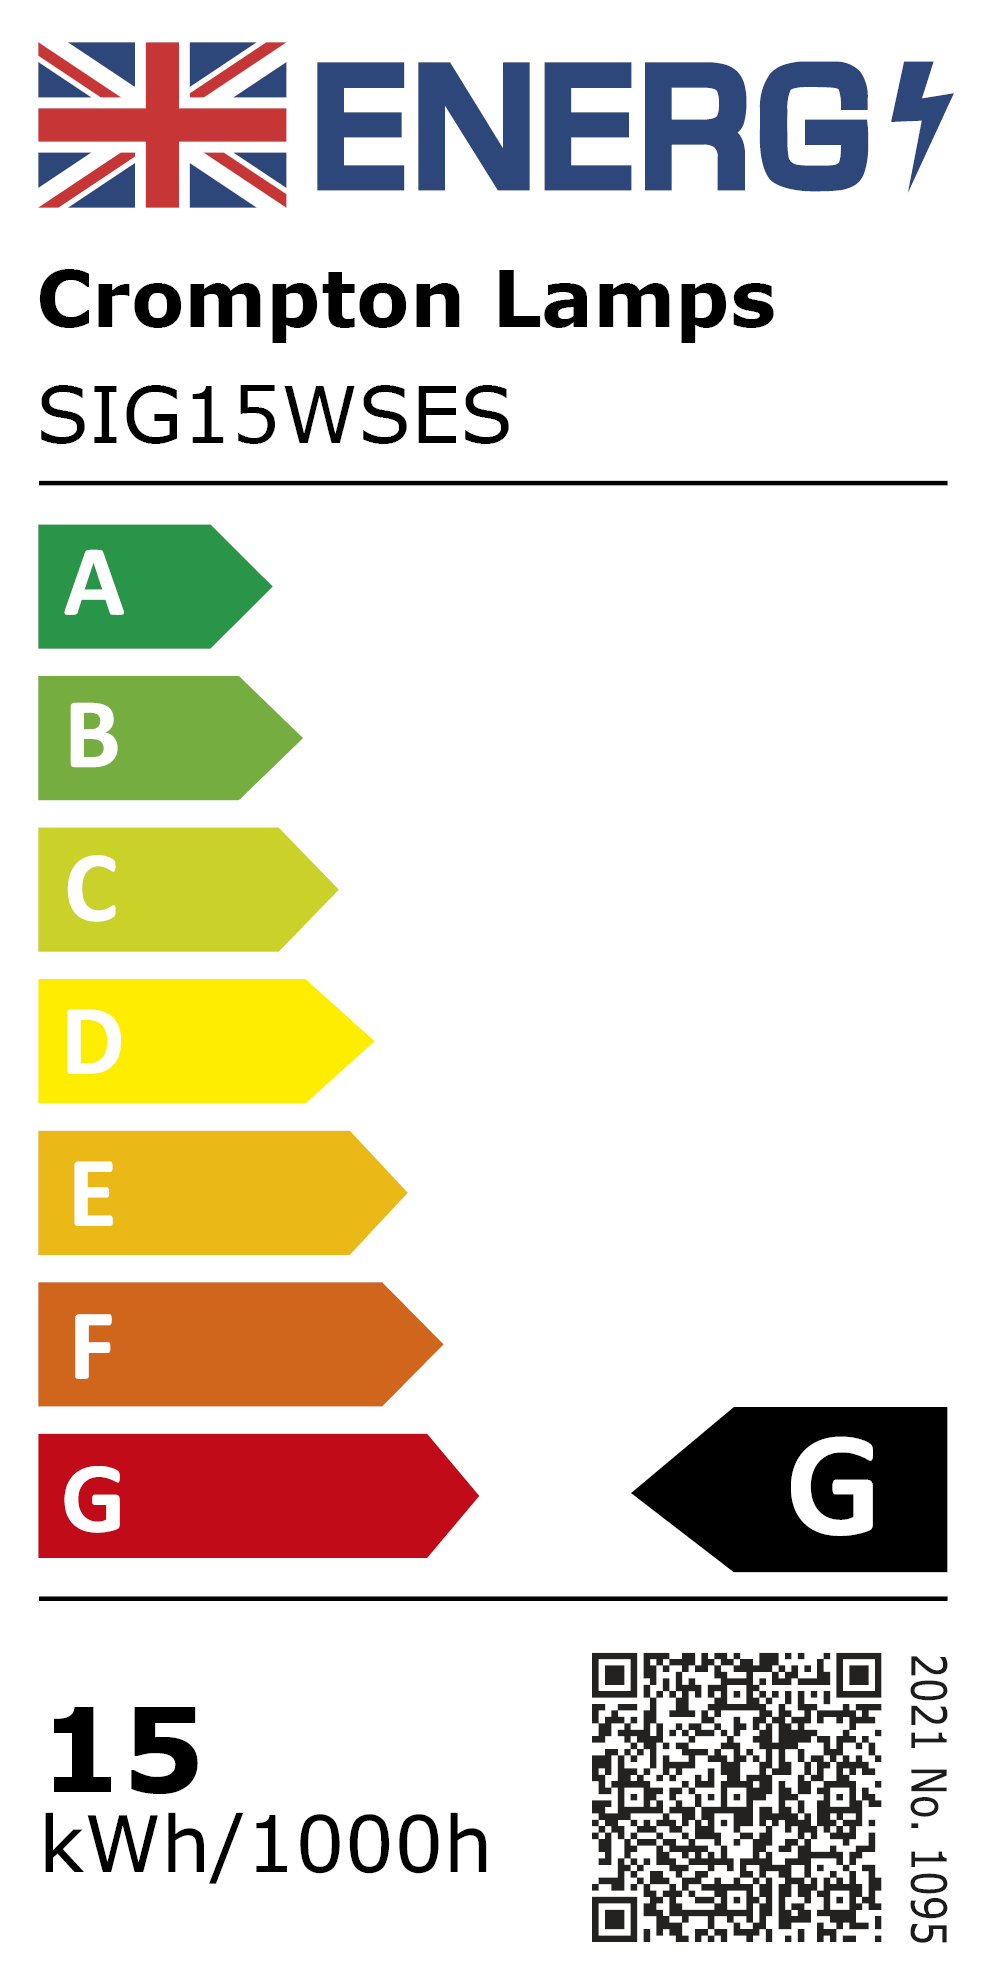 New 2021 Energy Rating Label: Stock Code SIG15WSES